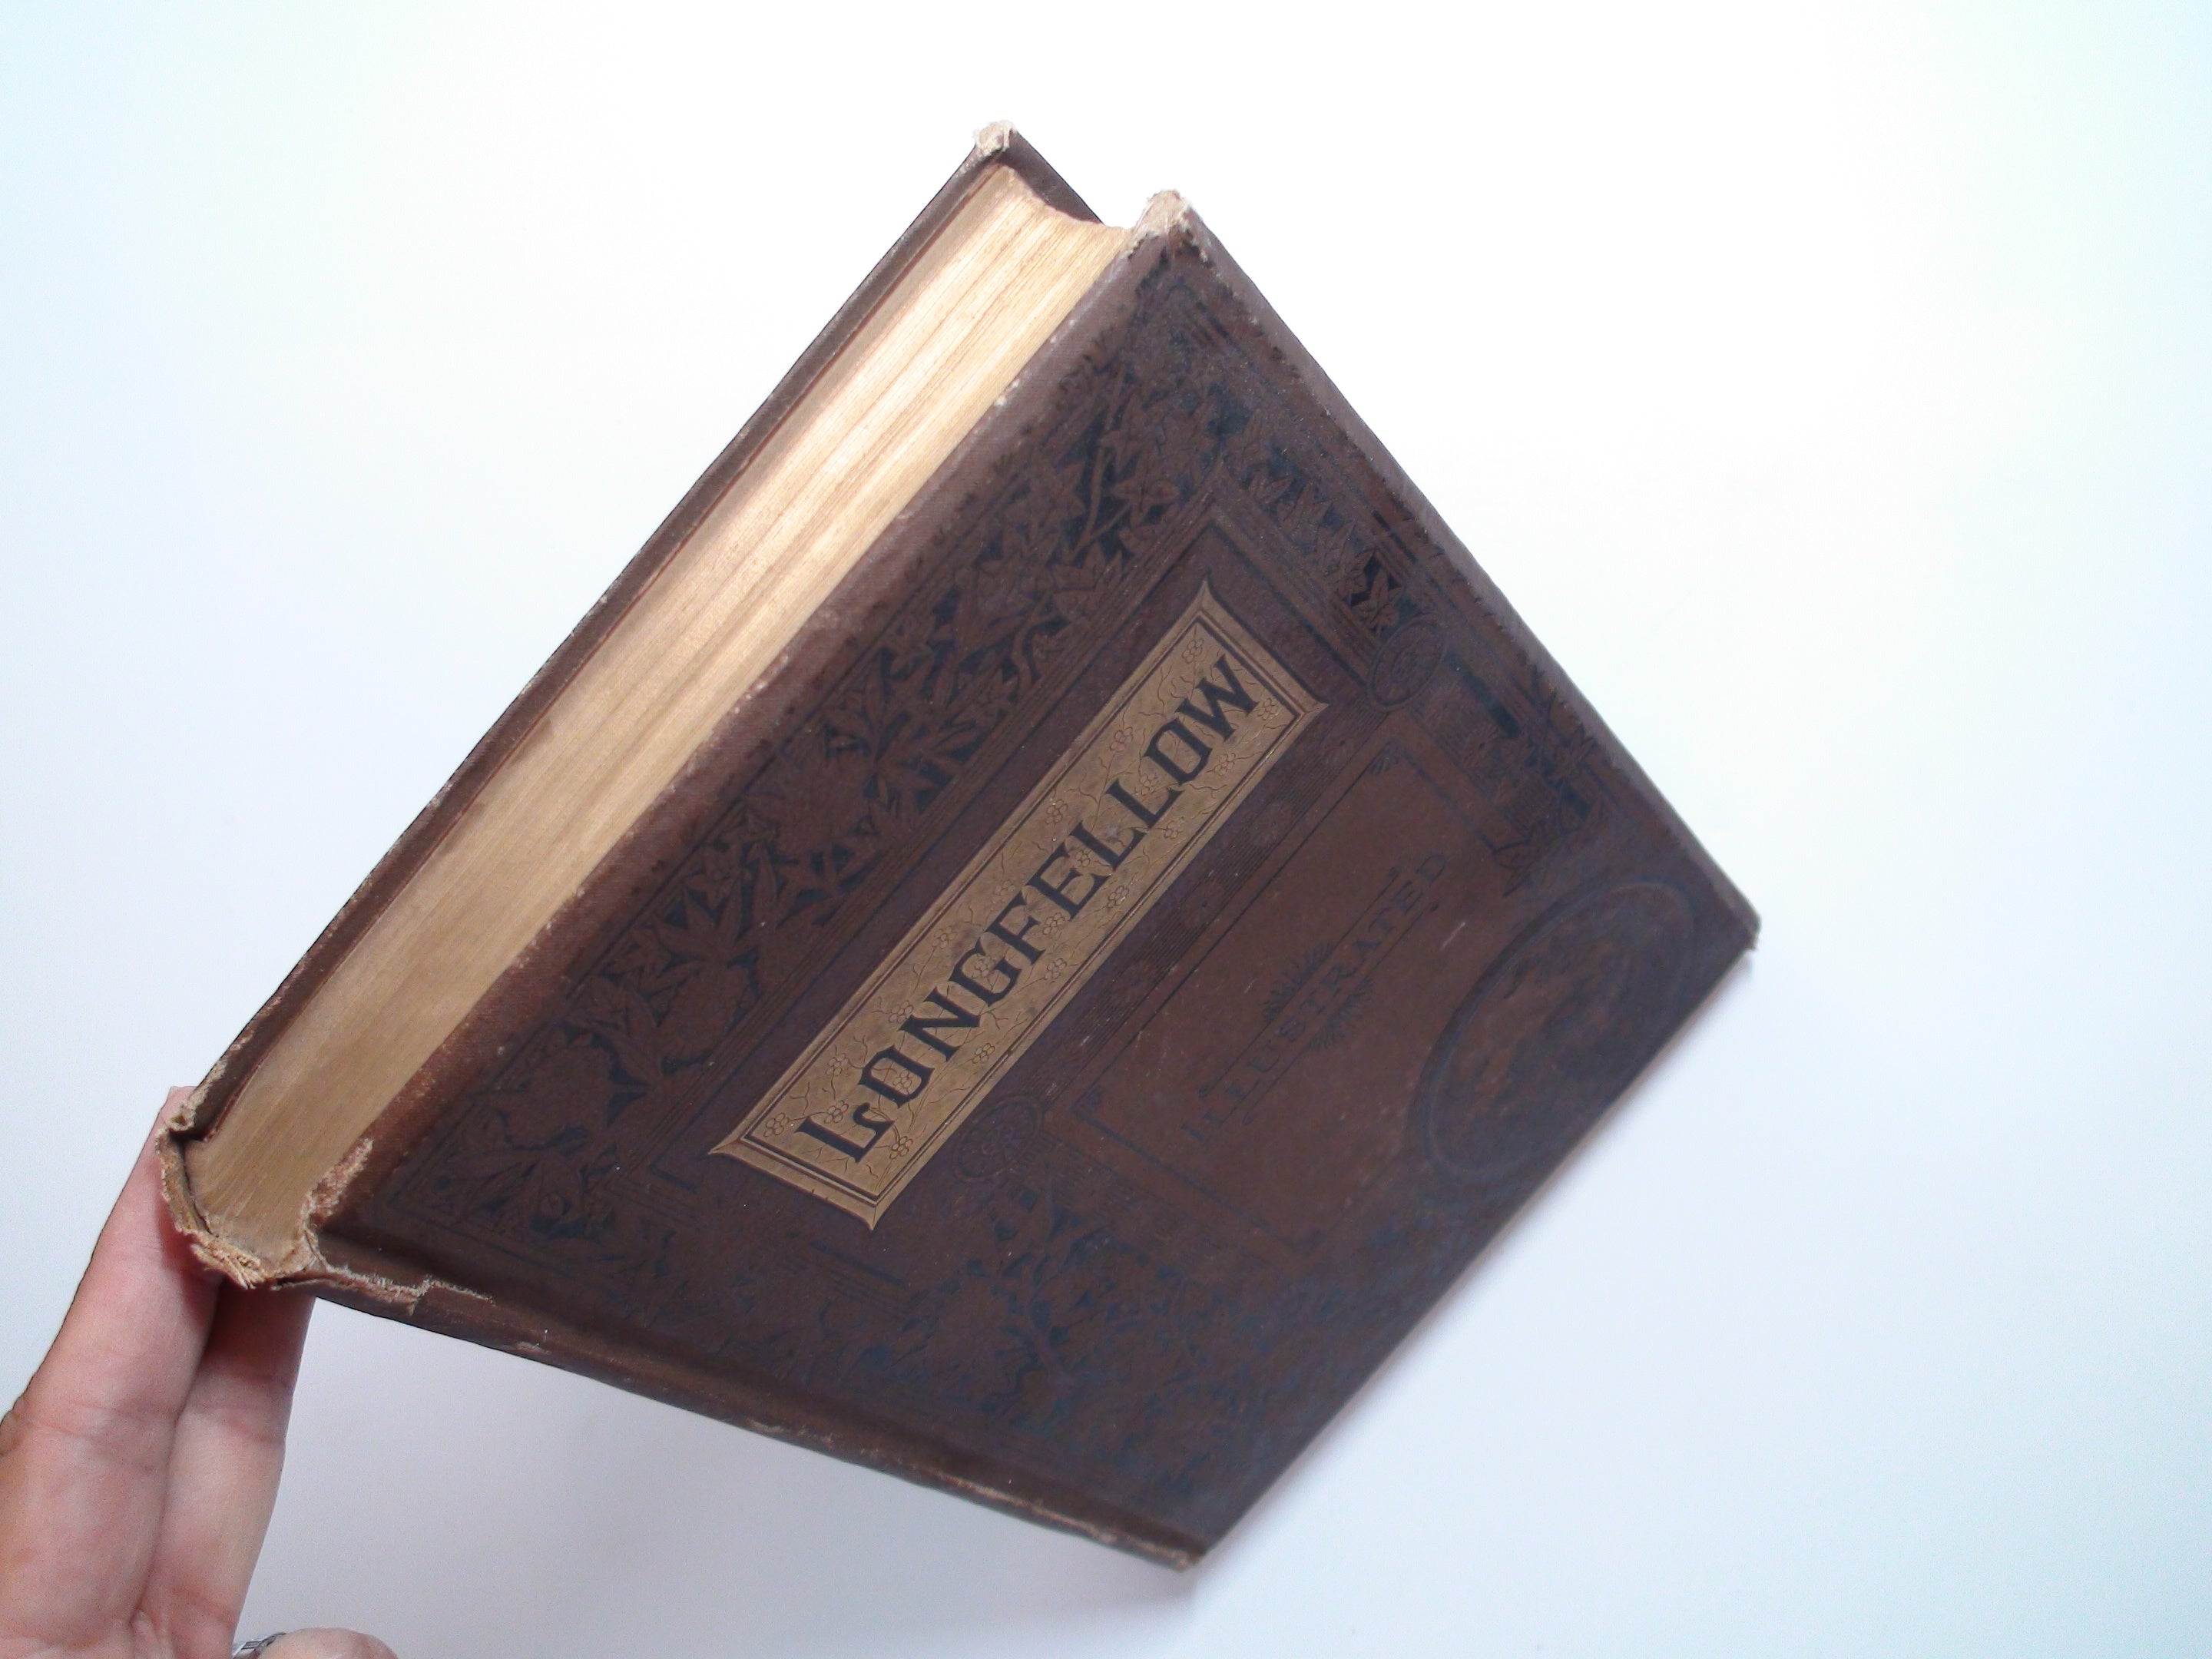 The Complete Poetical Works of Henry Wadsworth Longfellow, 1885